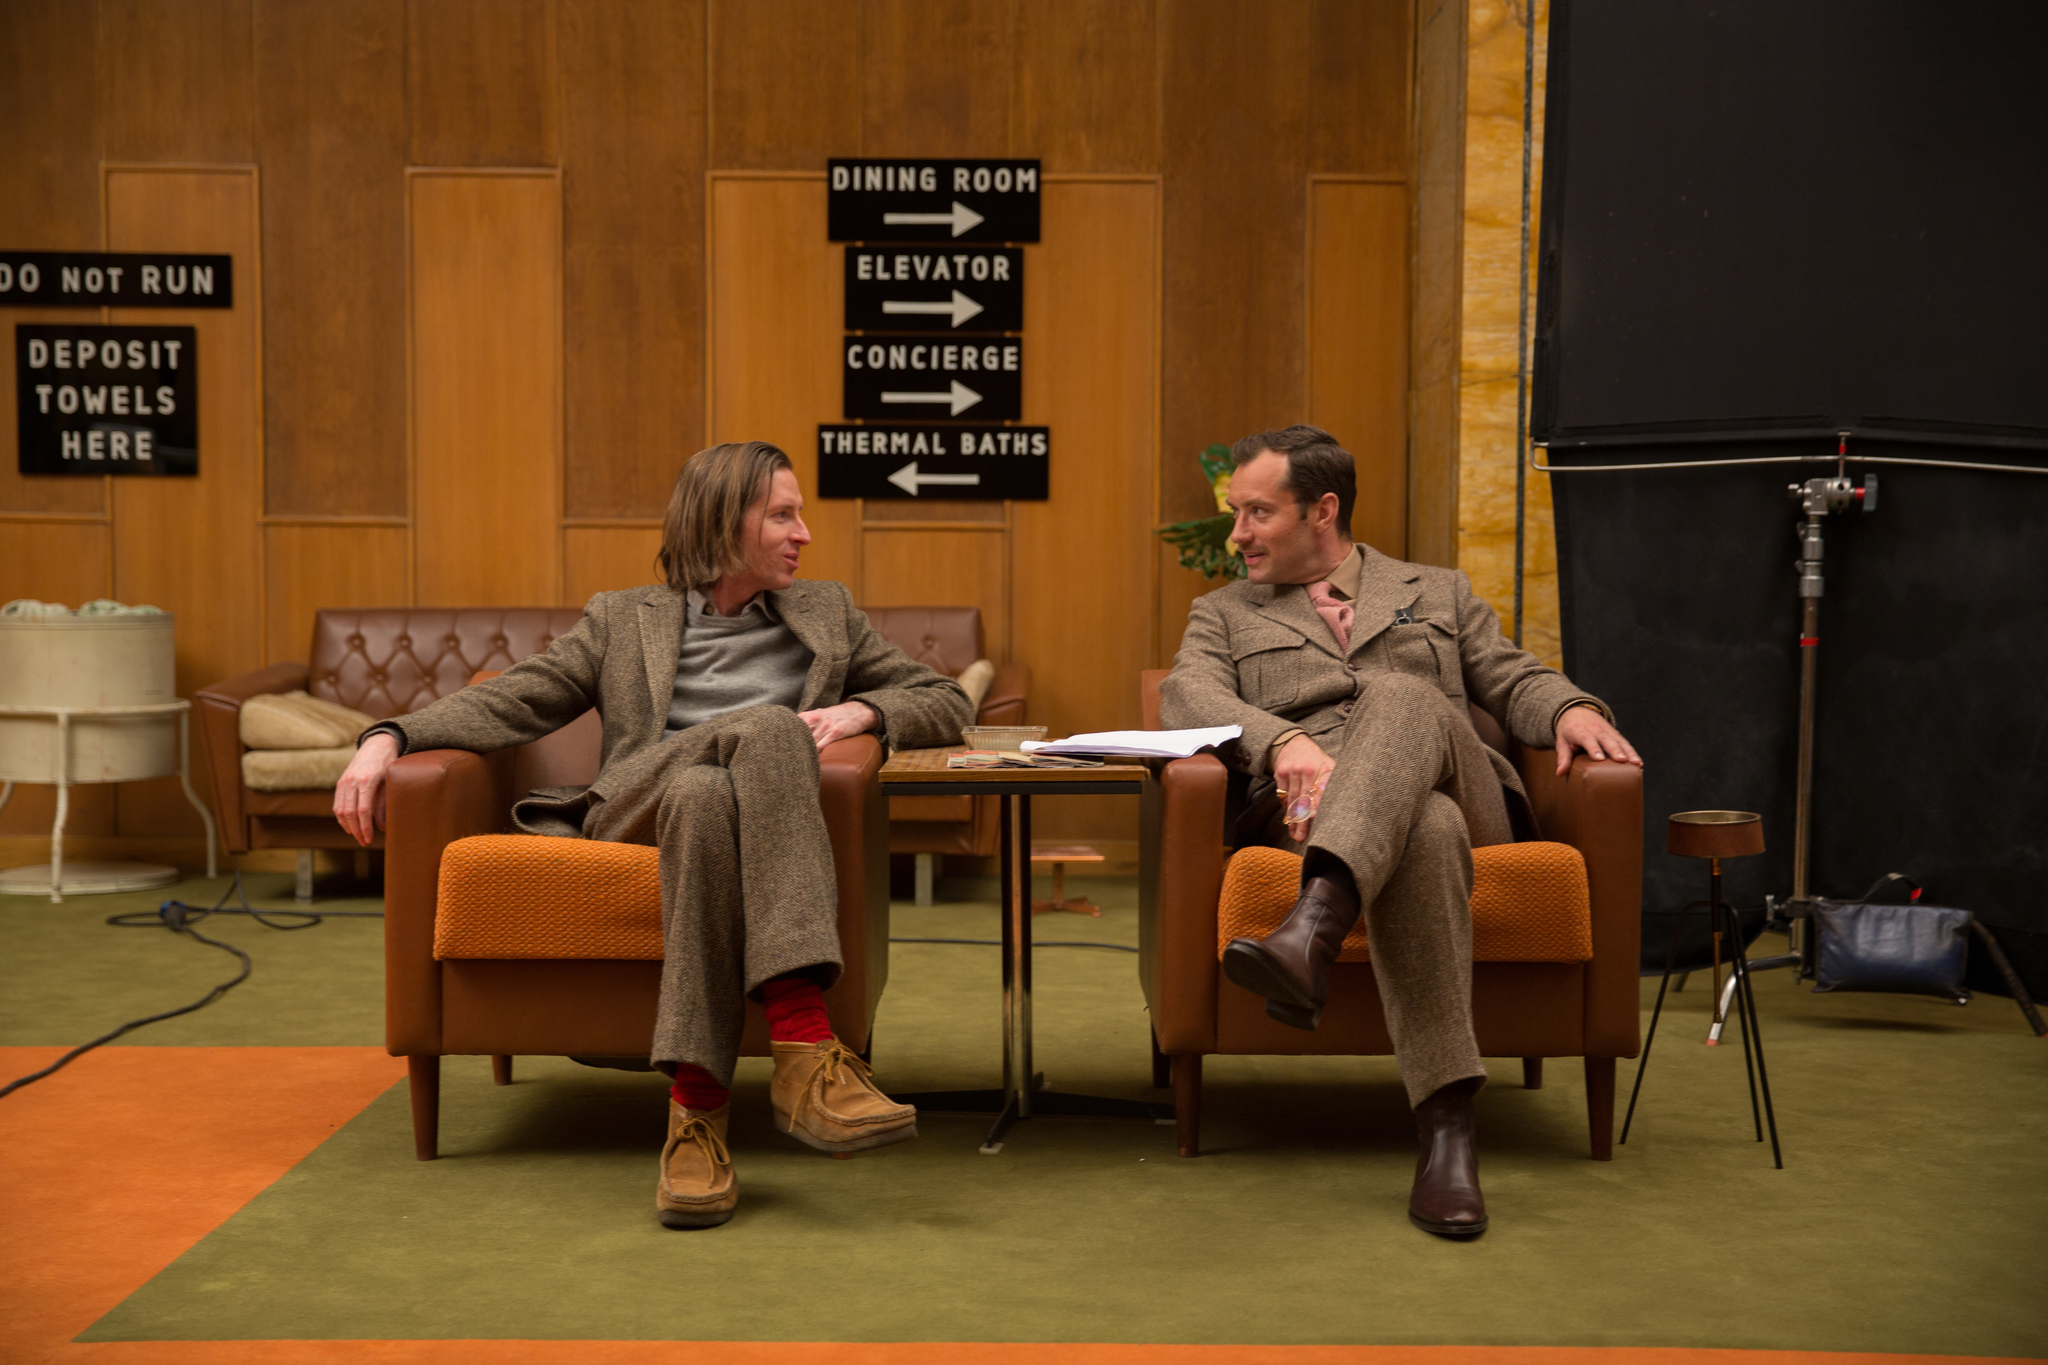 Jude Law and Wes Anderson in Viesbutis Didysis Budapestas (2014)